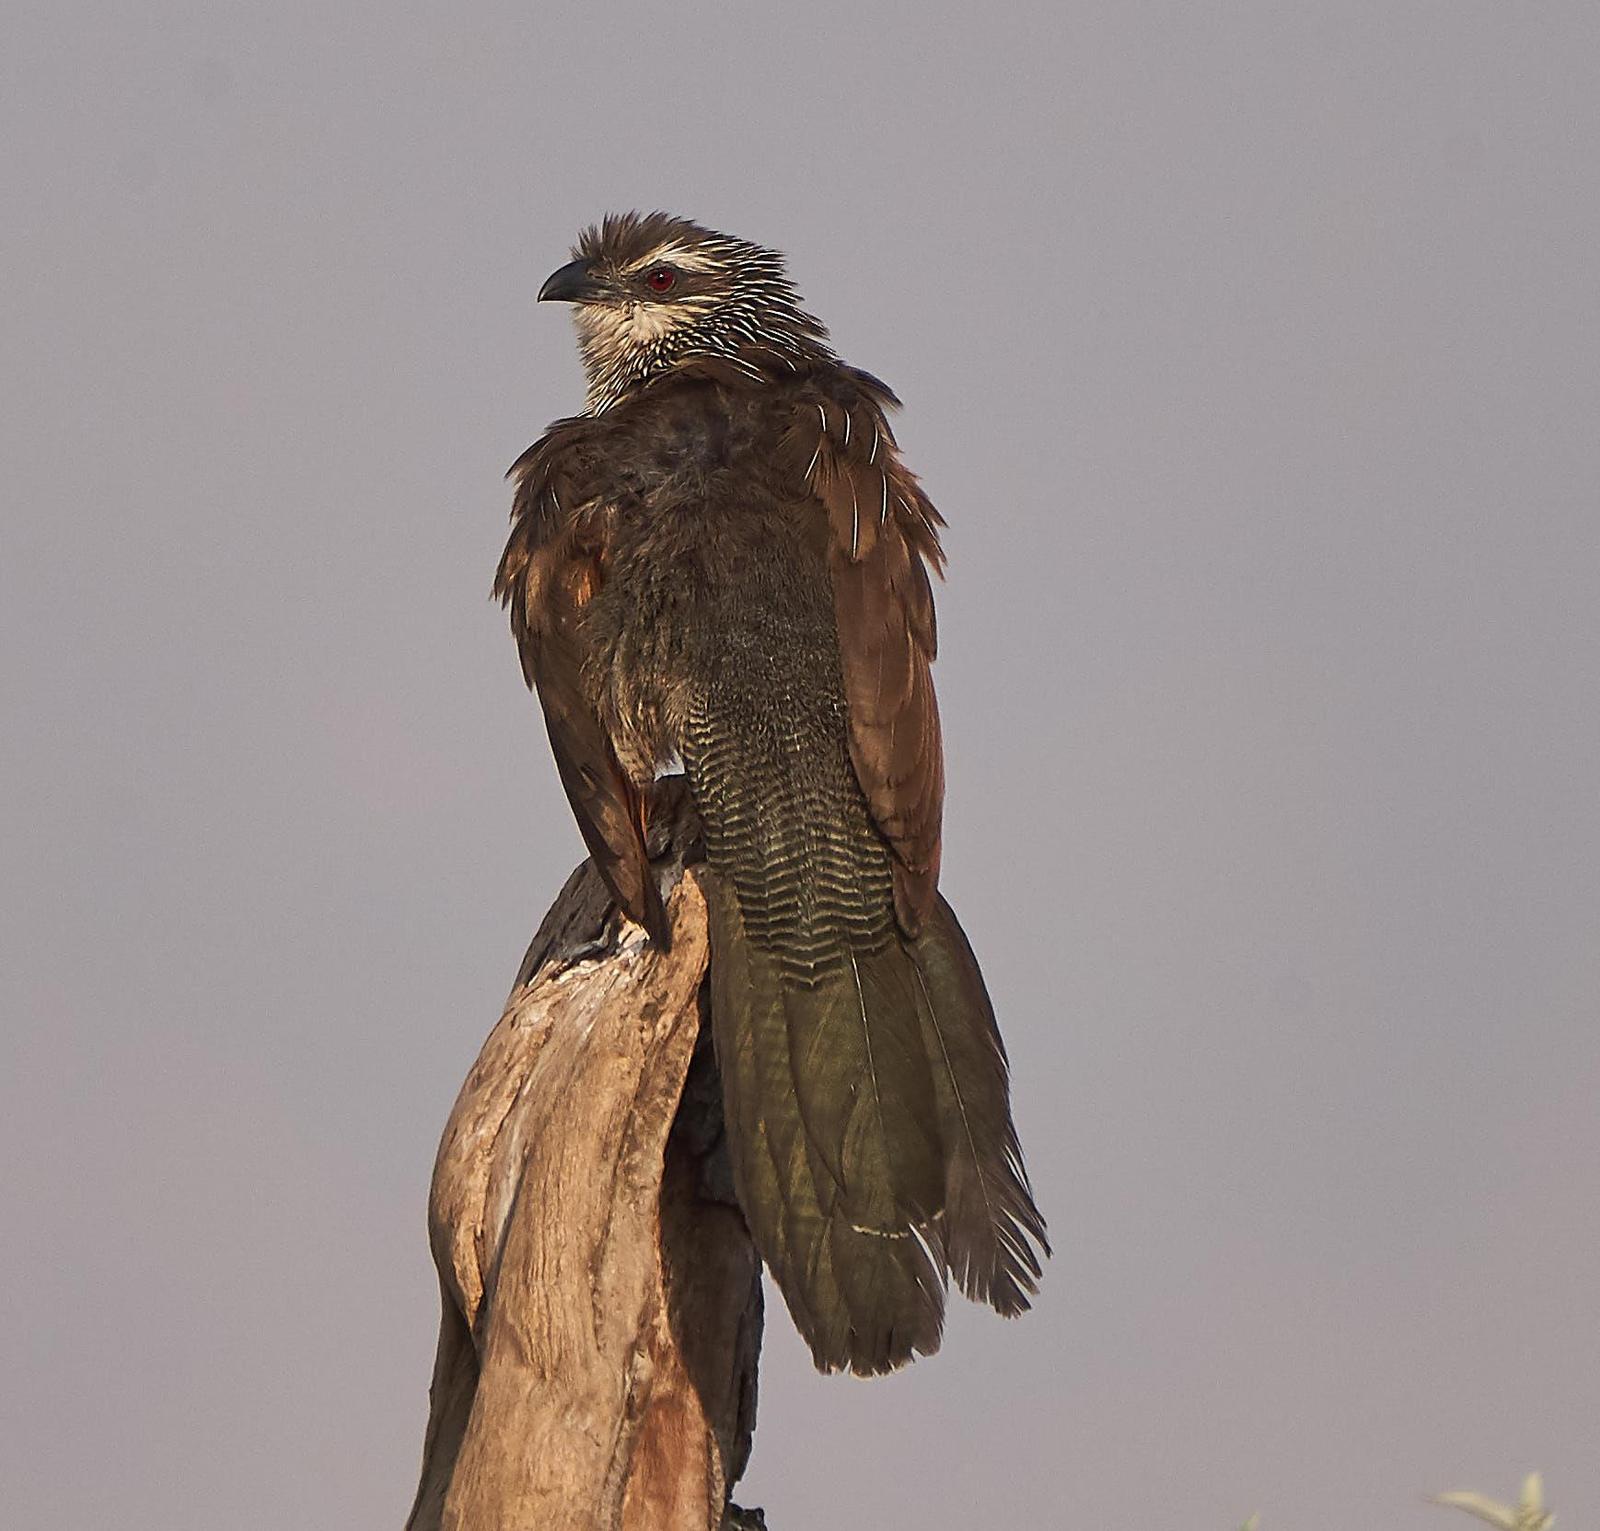 White-browed Coucal Photo by Steven Cheong